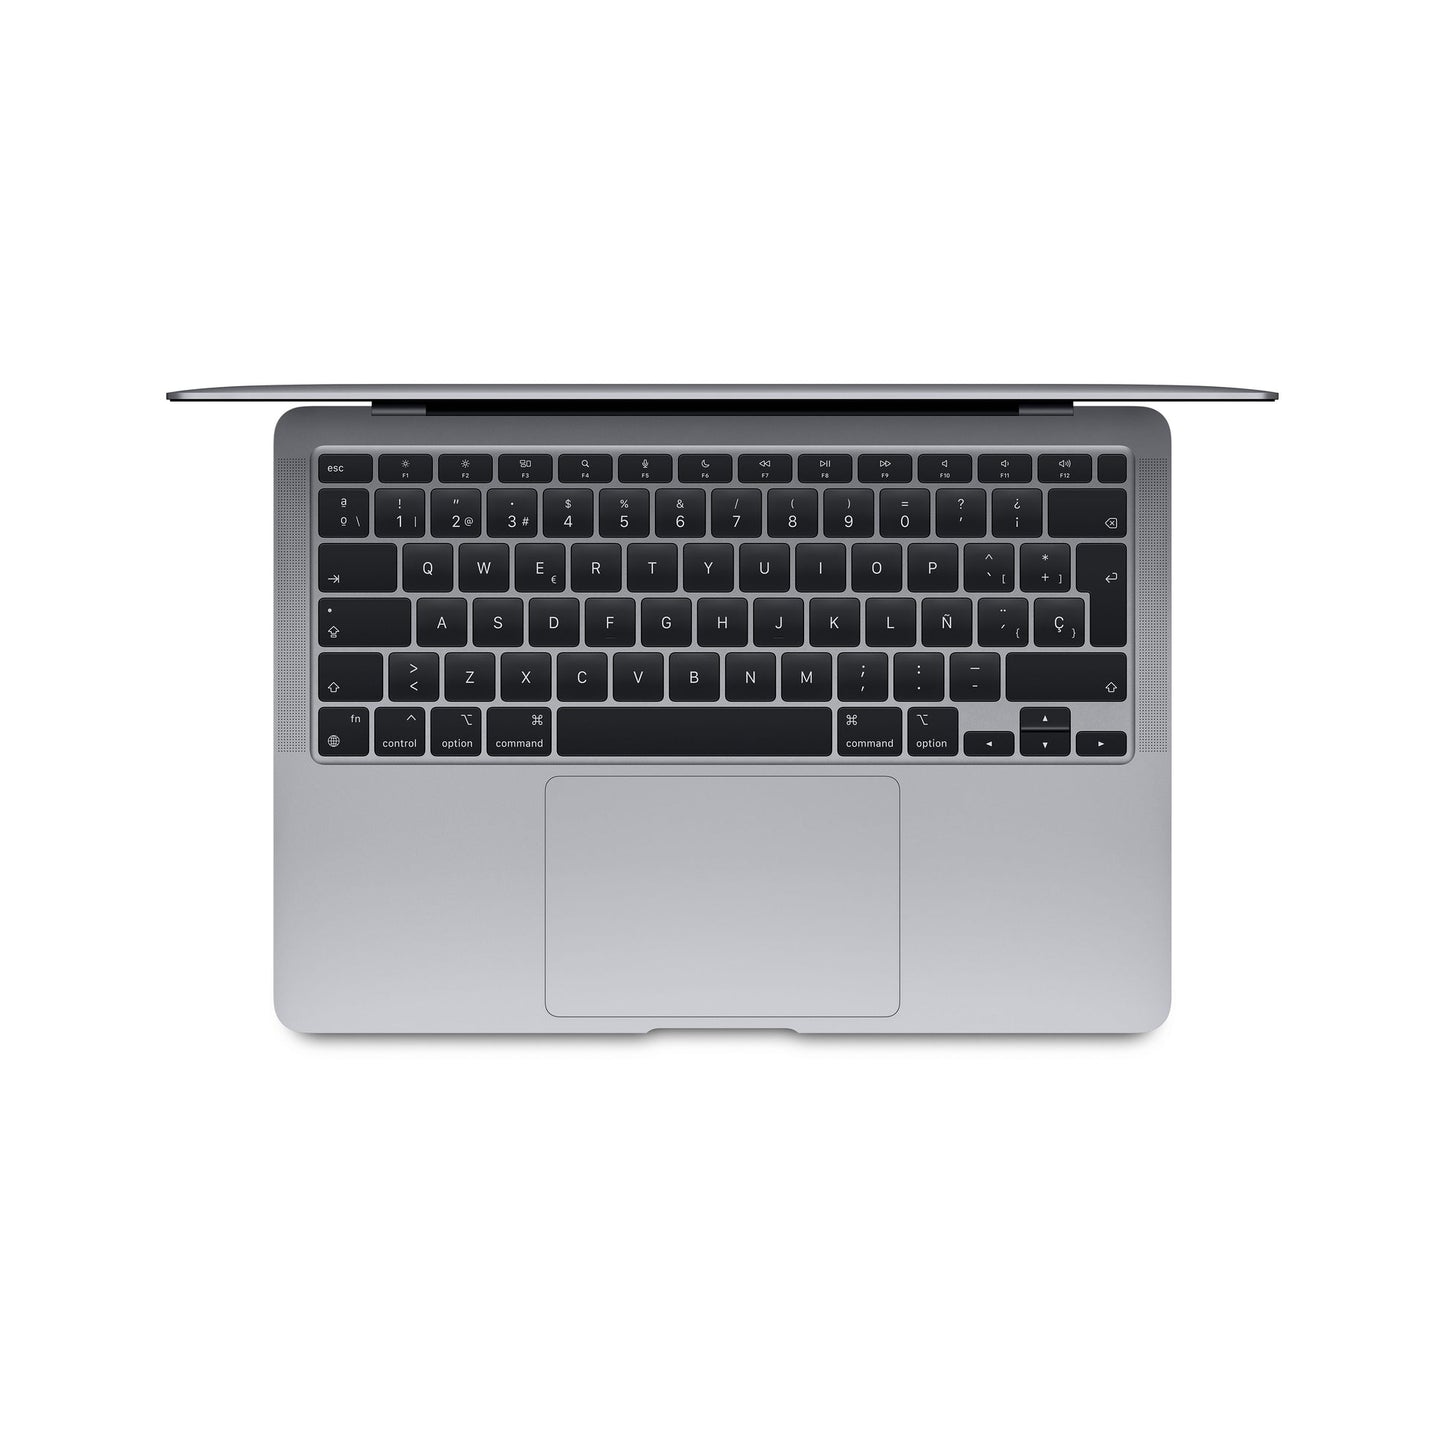 Apple MacBook Air 13 : Apple M1 chip with 8-core CPU and 7-core GPU, 256GB - Space Grey